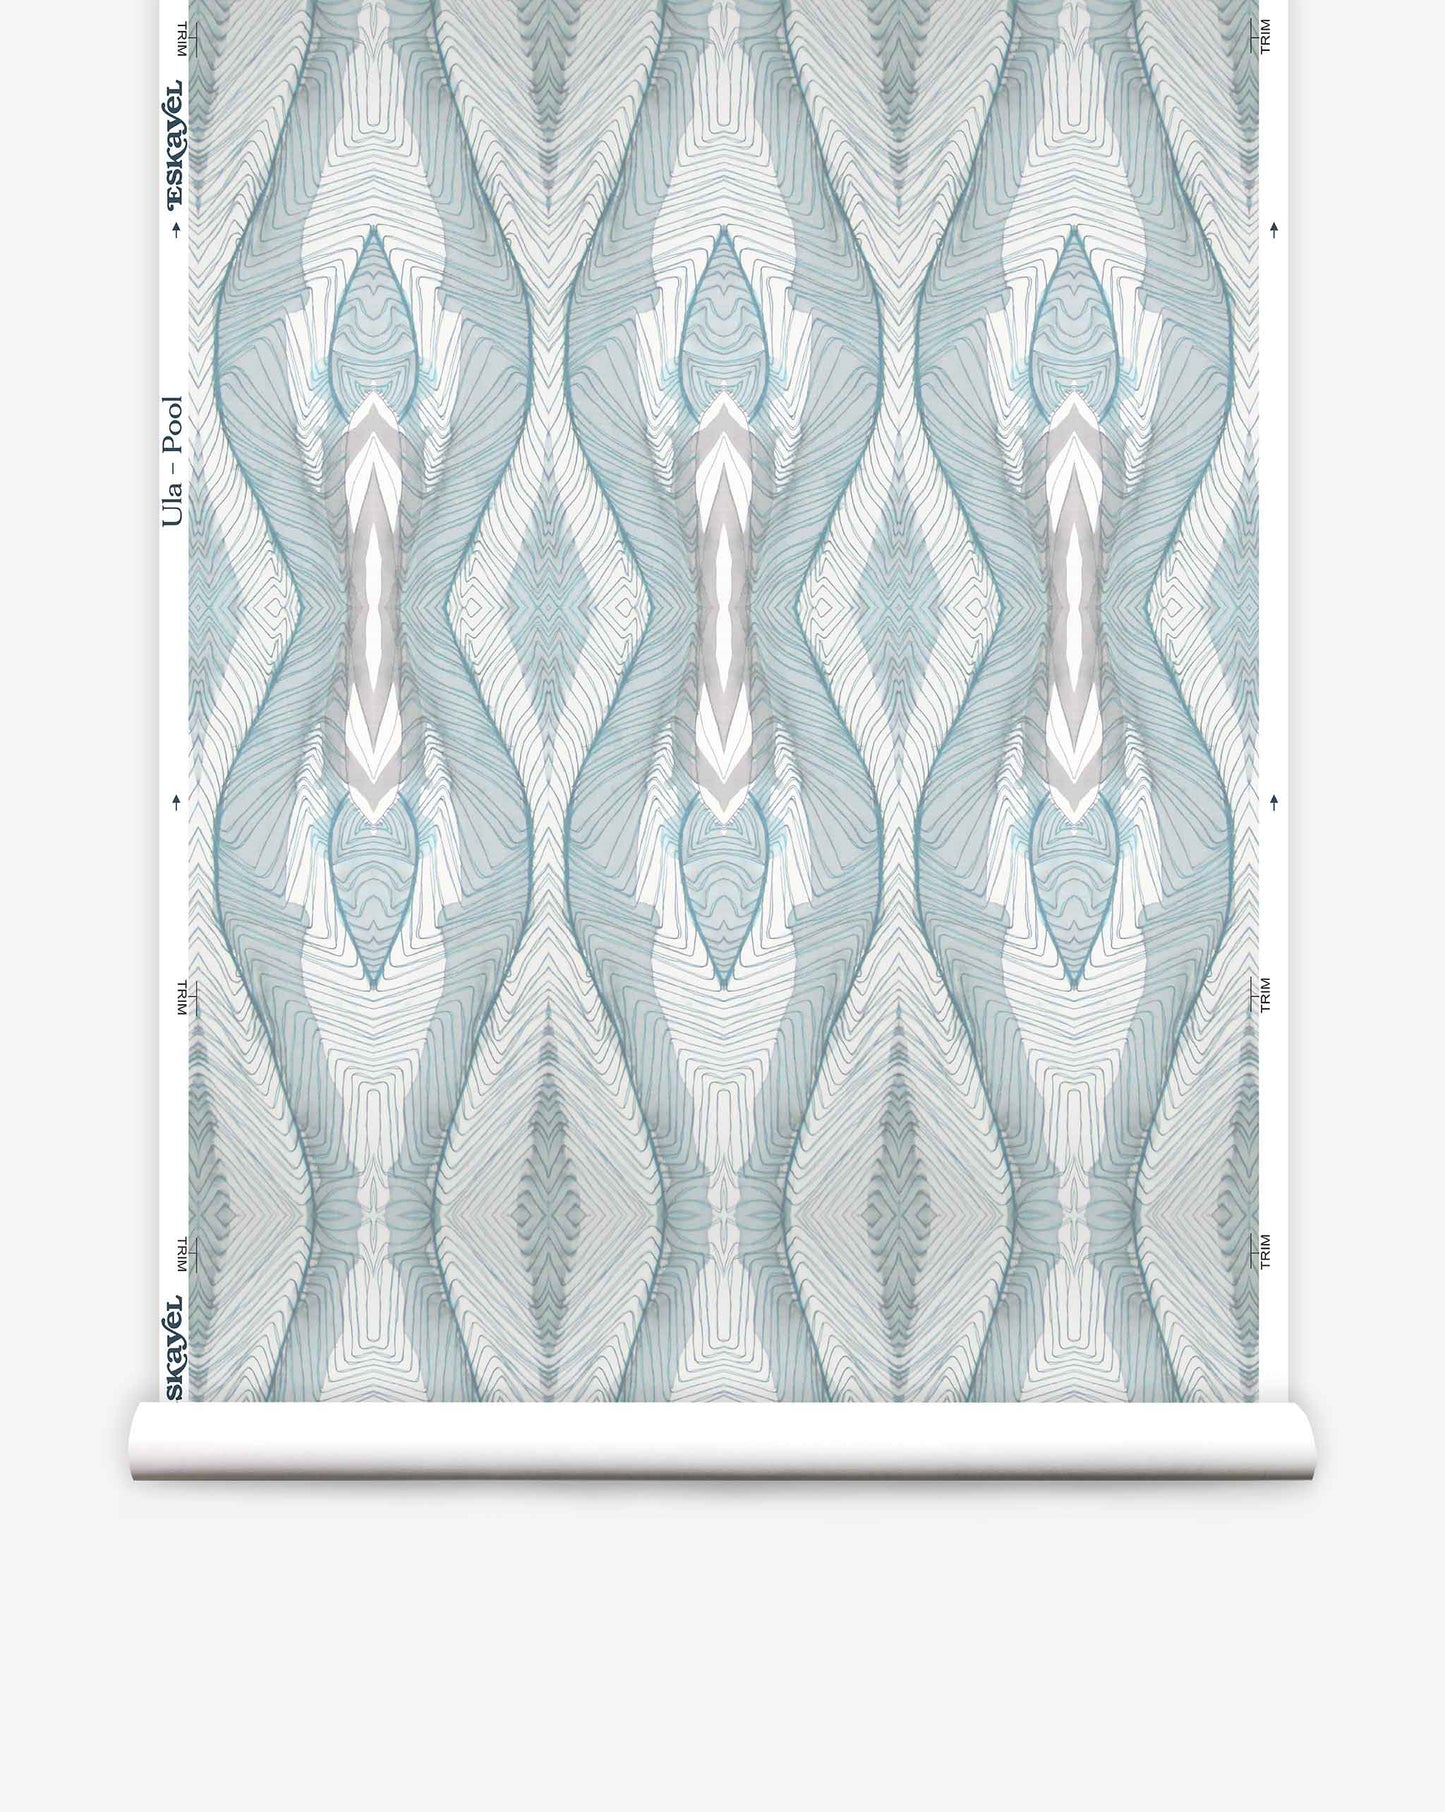 A roll of Ula Wallpaper||Pool featuring a symmetrical teal and white geometric pattern.